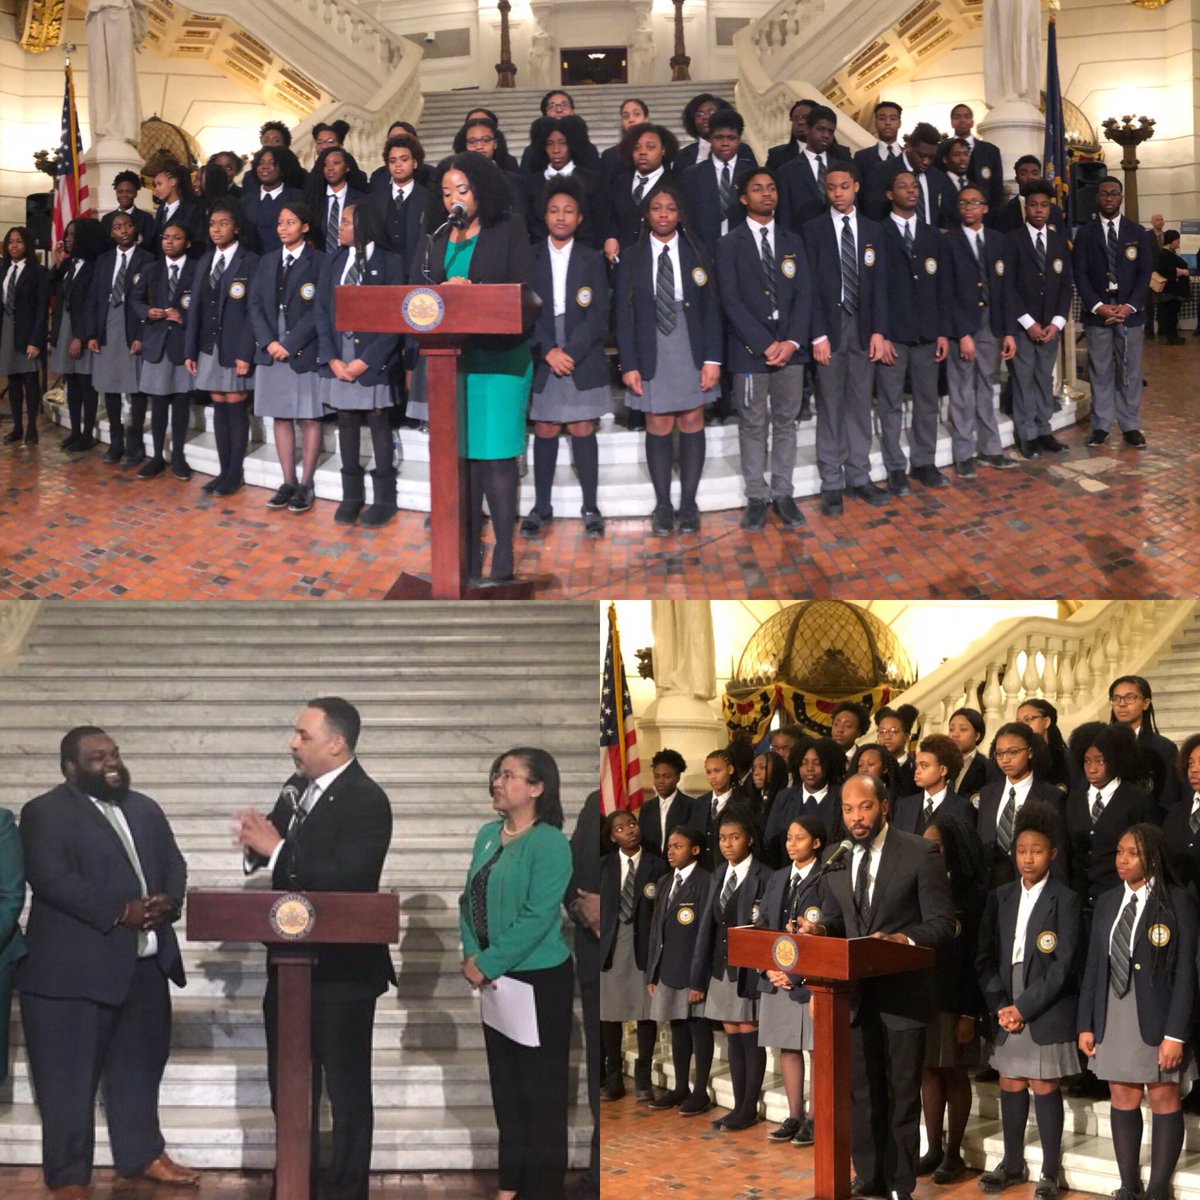 The amazing choir of Pine Forge Academy, one of just 4 remaining #historicallyBlack boarding schools established in defiance of #JimCrow & #whitesupremacy & committed for generations to #Blackexcellence.